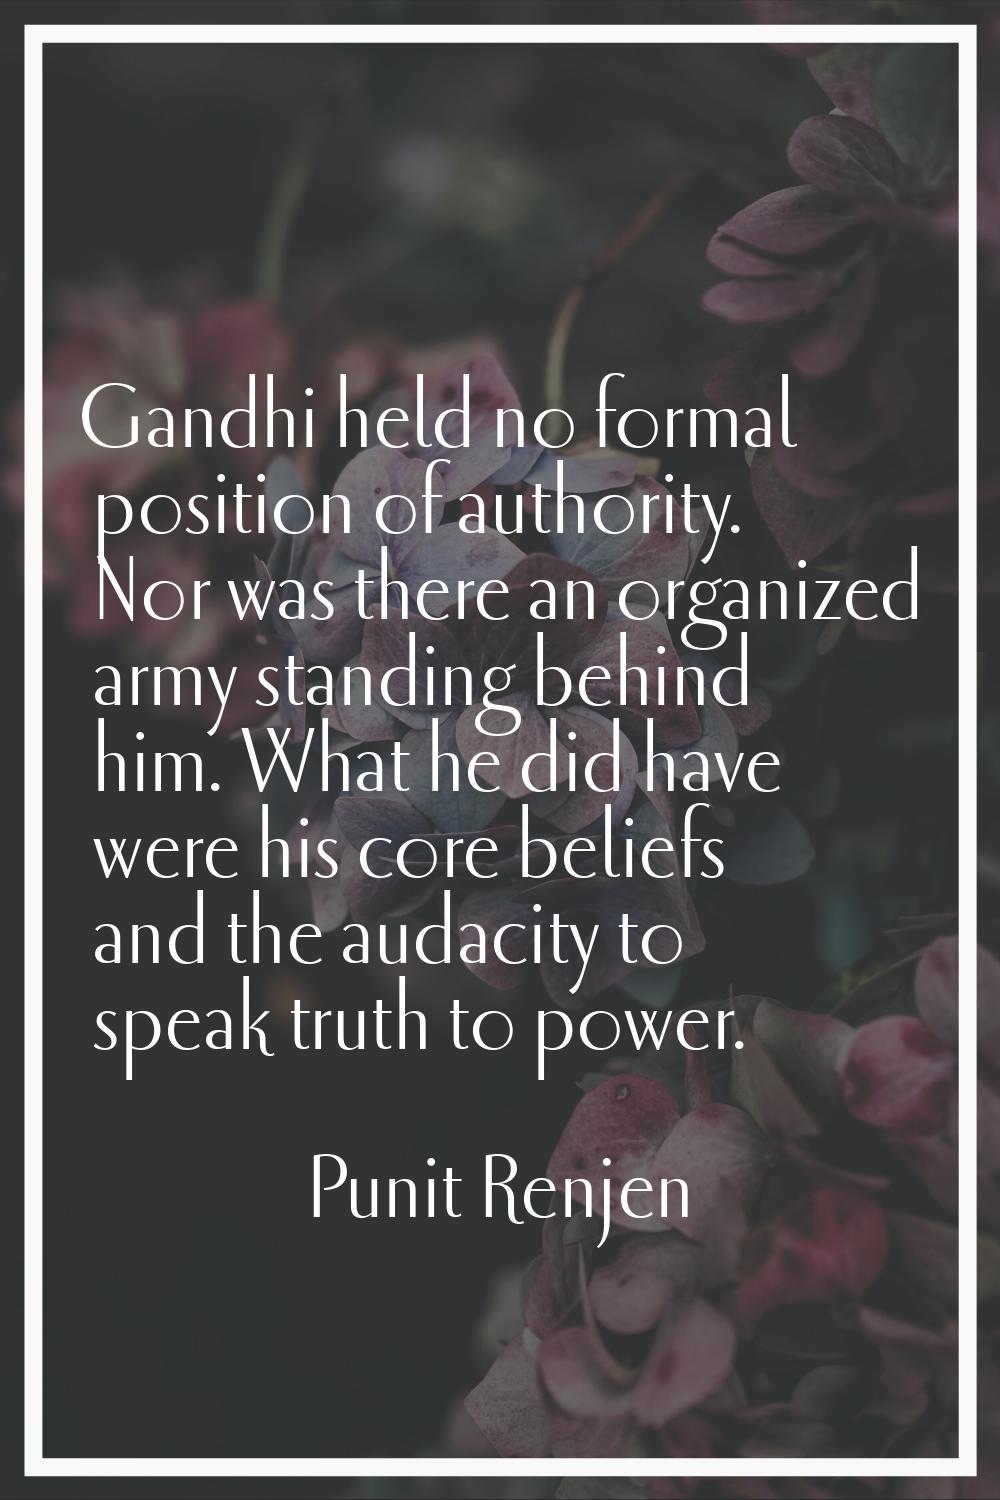 Gandhi held no formal position of authority. Nor was there an organized army standing behind him. W